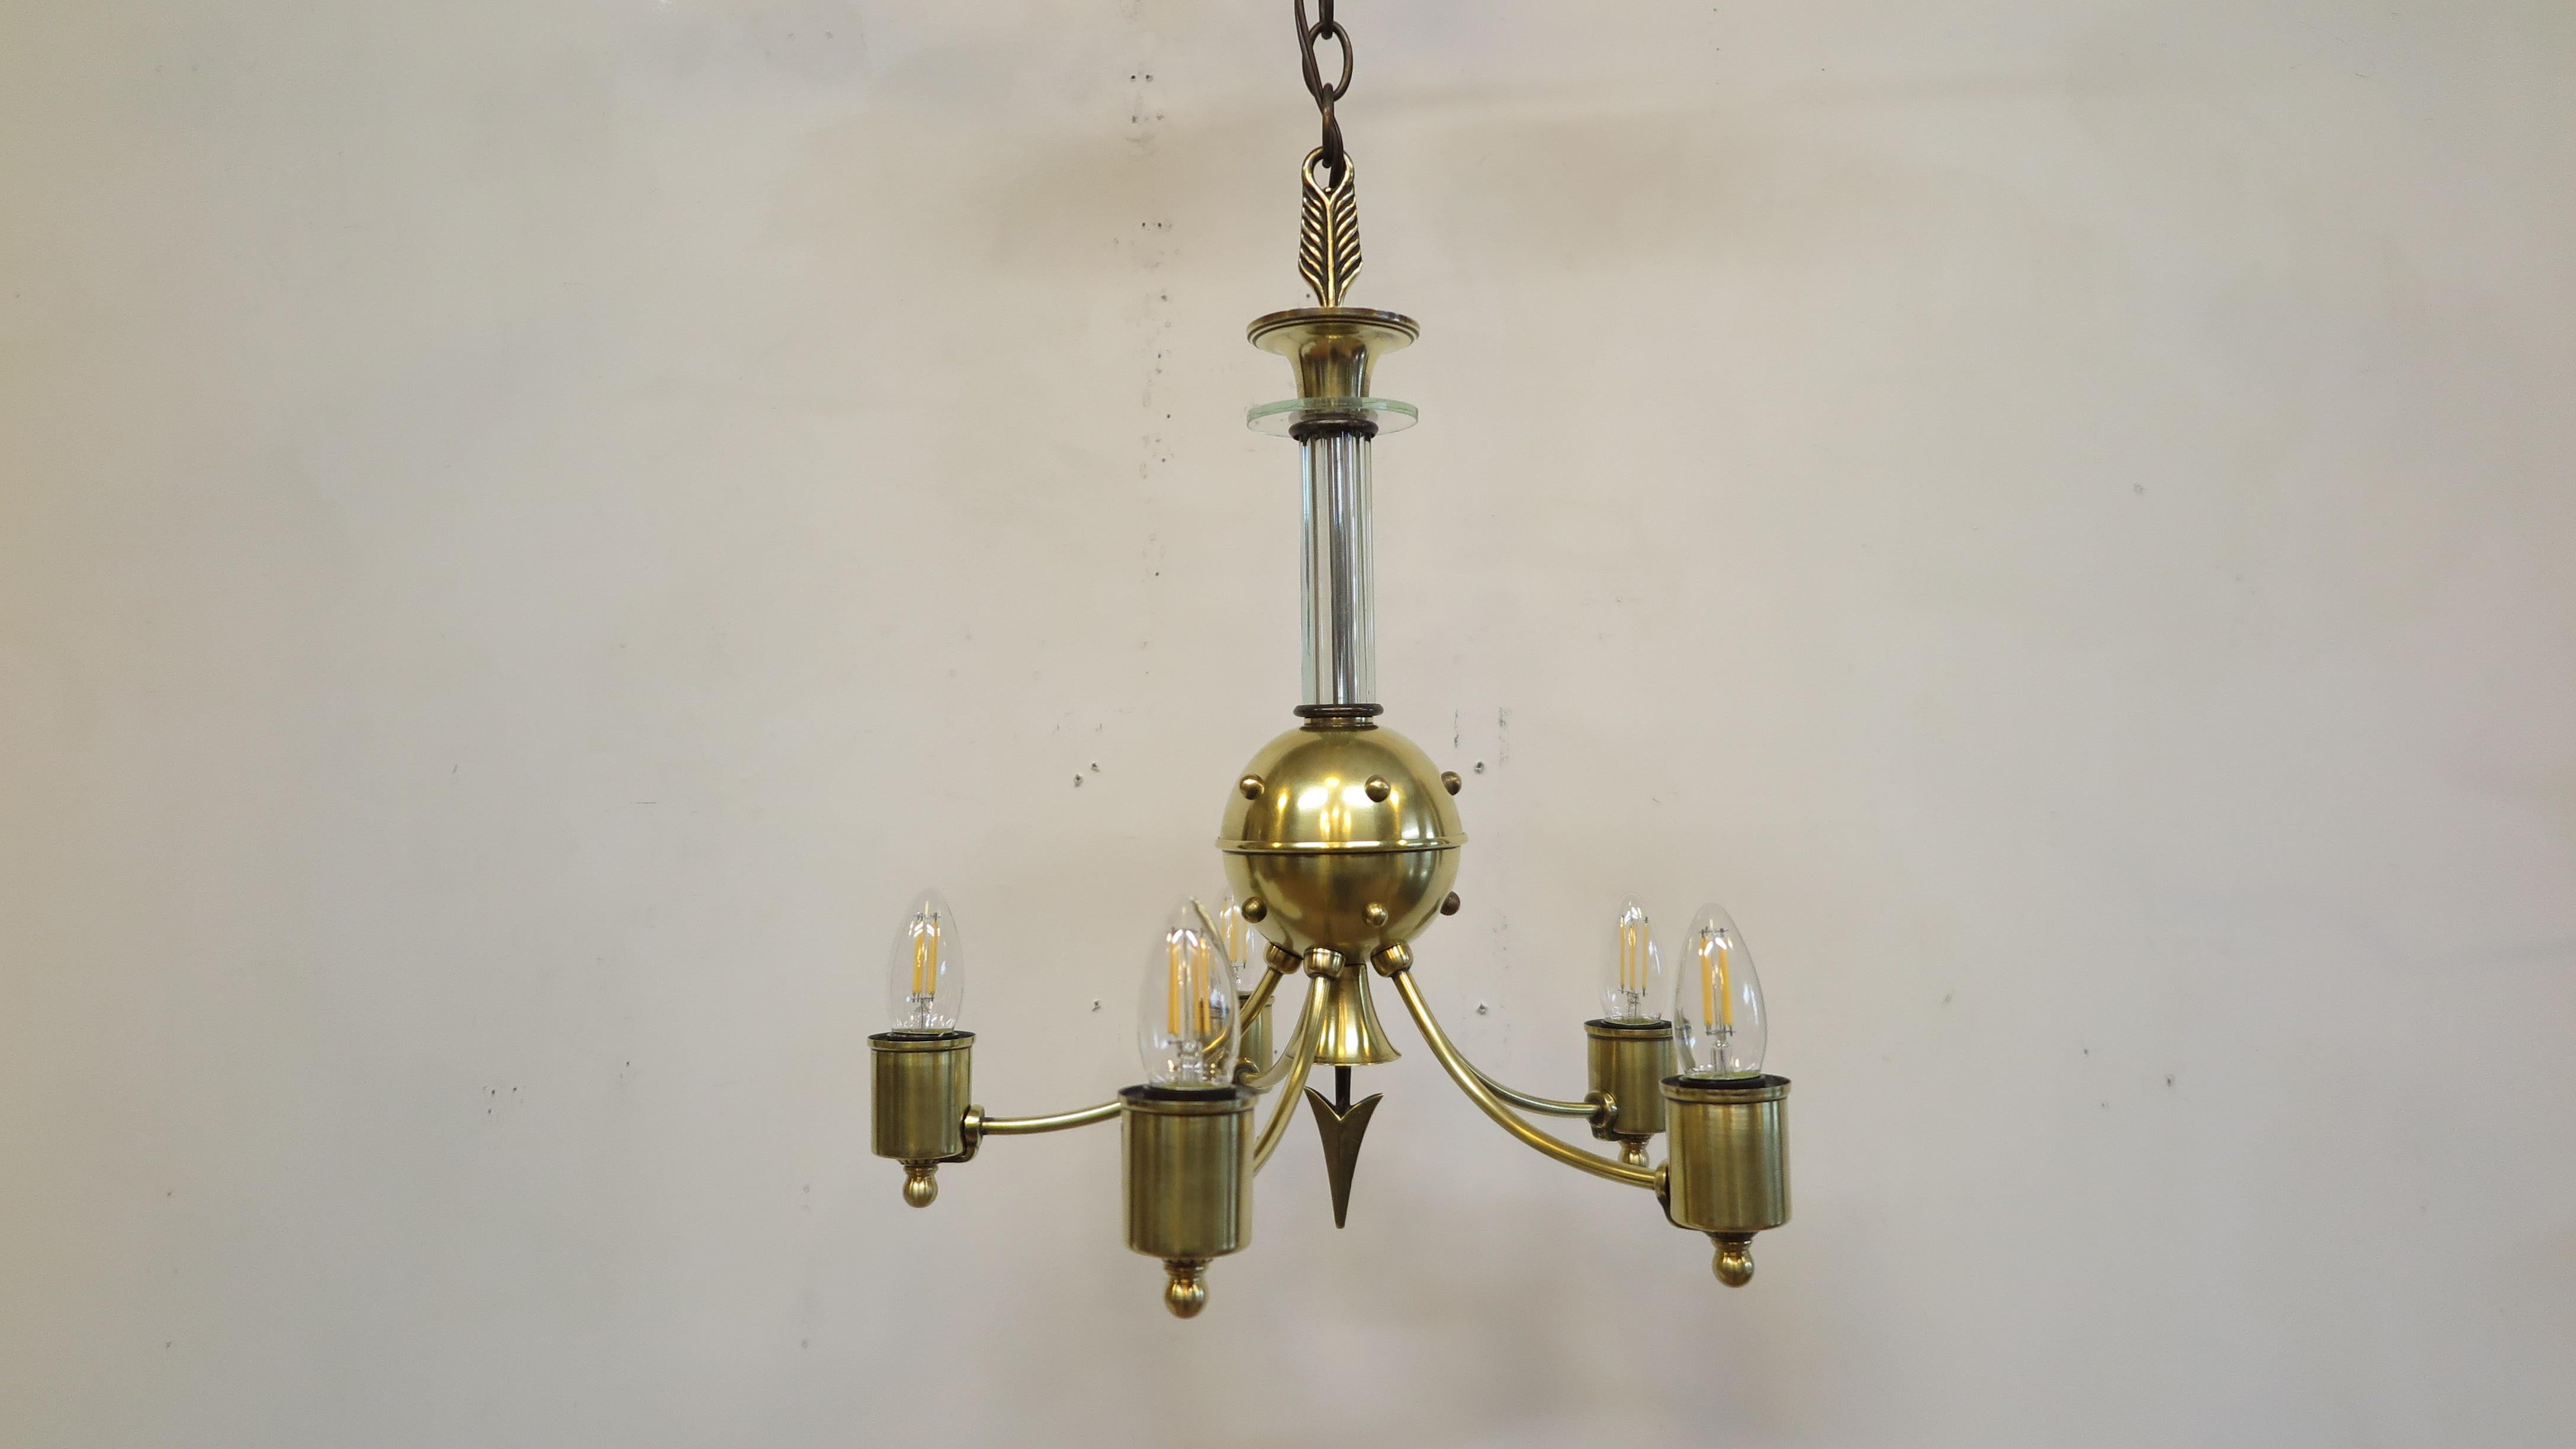 An American Brass Machine Age / Mid Century chandelier. Machine age Mid Century chandelier with Atomic styling by Globe Lighting Fixture Mfg. Co. Made in America. A fantastic find of a rarely seen design with an Atomic motif make this a uniquely